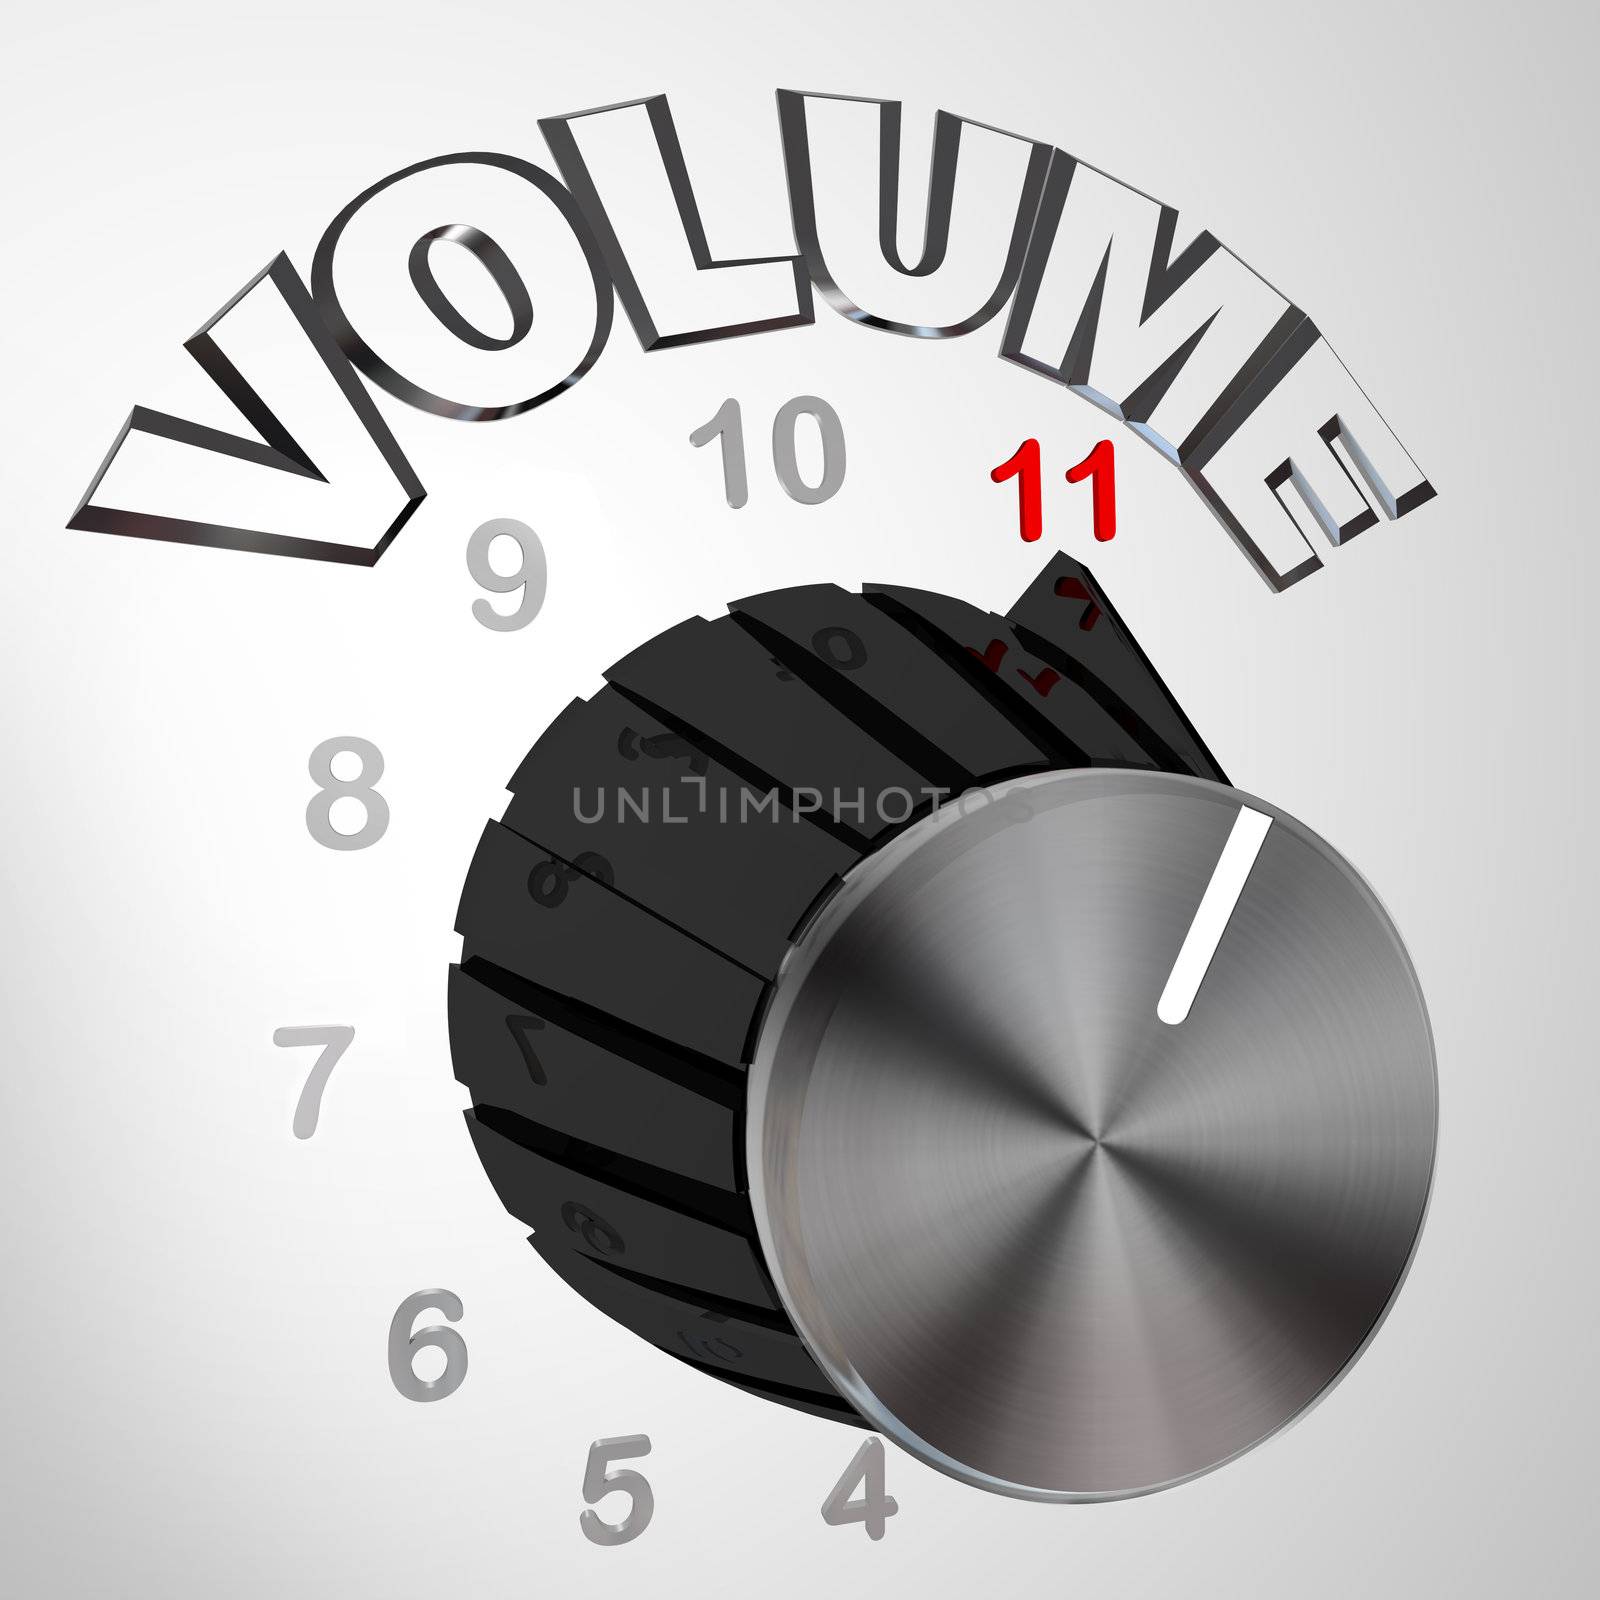 A volume dial or knob turned all the way to 11 surpassing and exceeding the normal maximum sound on a speaker or amplifier, resembling a famous scene from a mock rock documentary